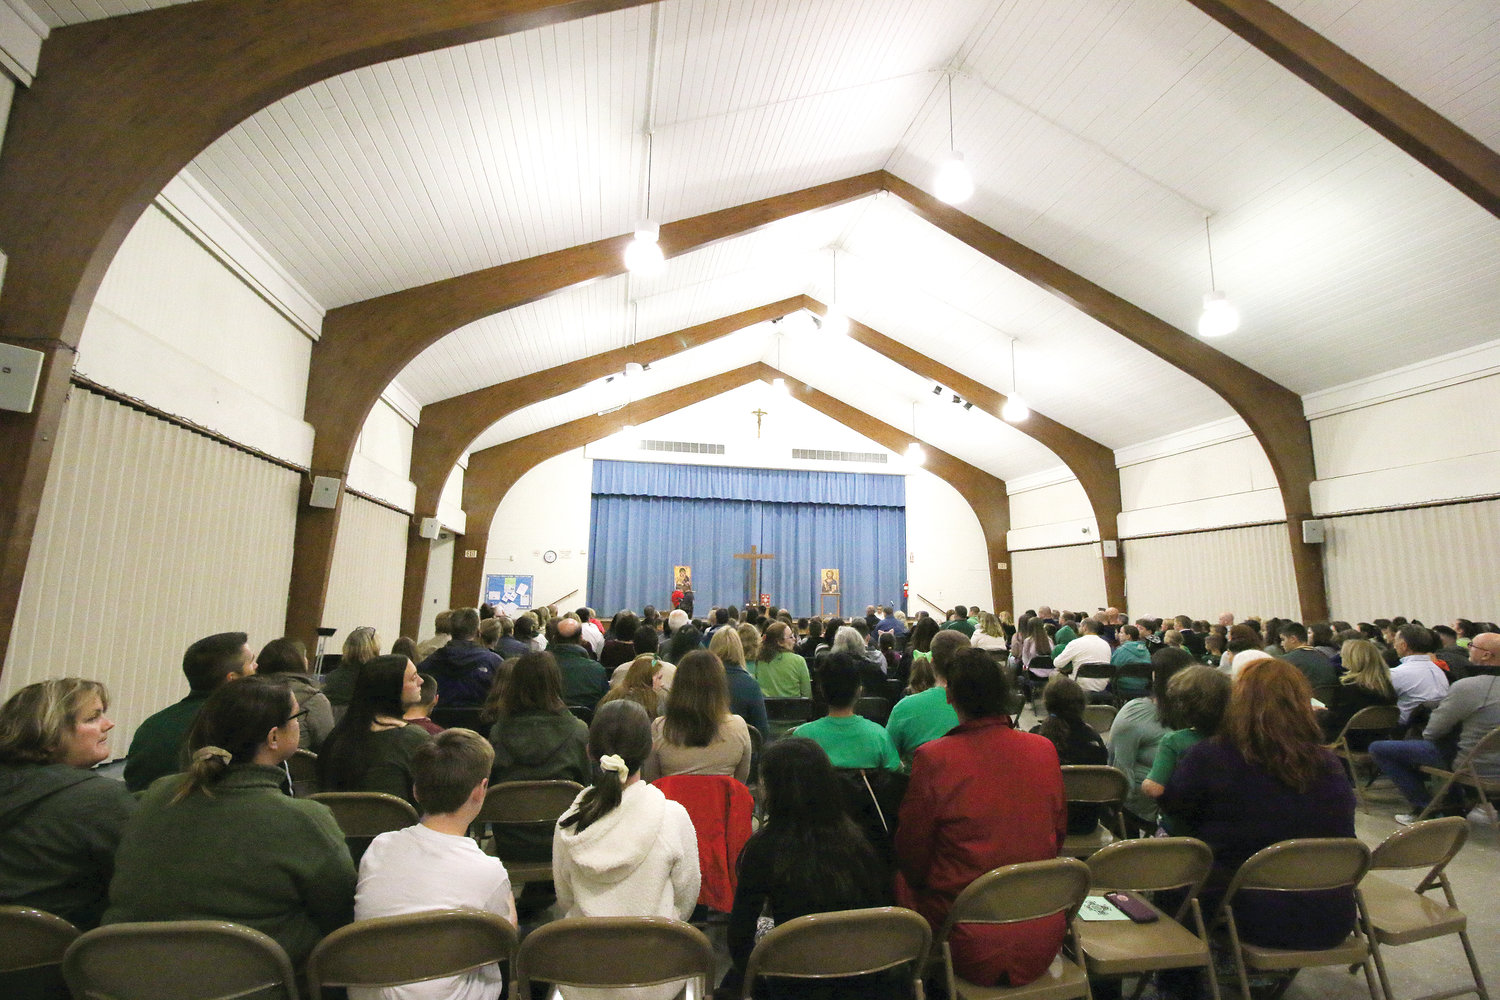 Hundreds fill the parish center at St. Michael Church on Wednesday, Oct. 9, in support of young parishioner Noah Antunes who was recently diagnosed with cancer at the beginning of the month.